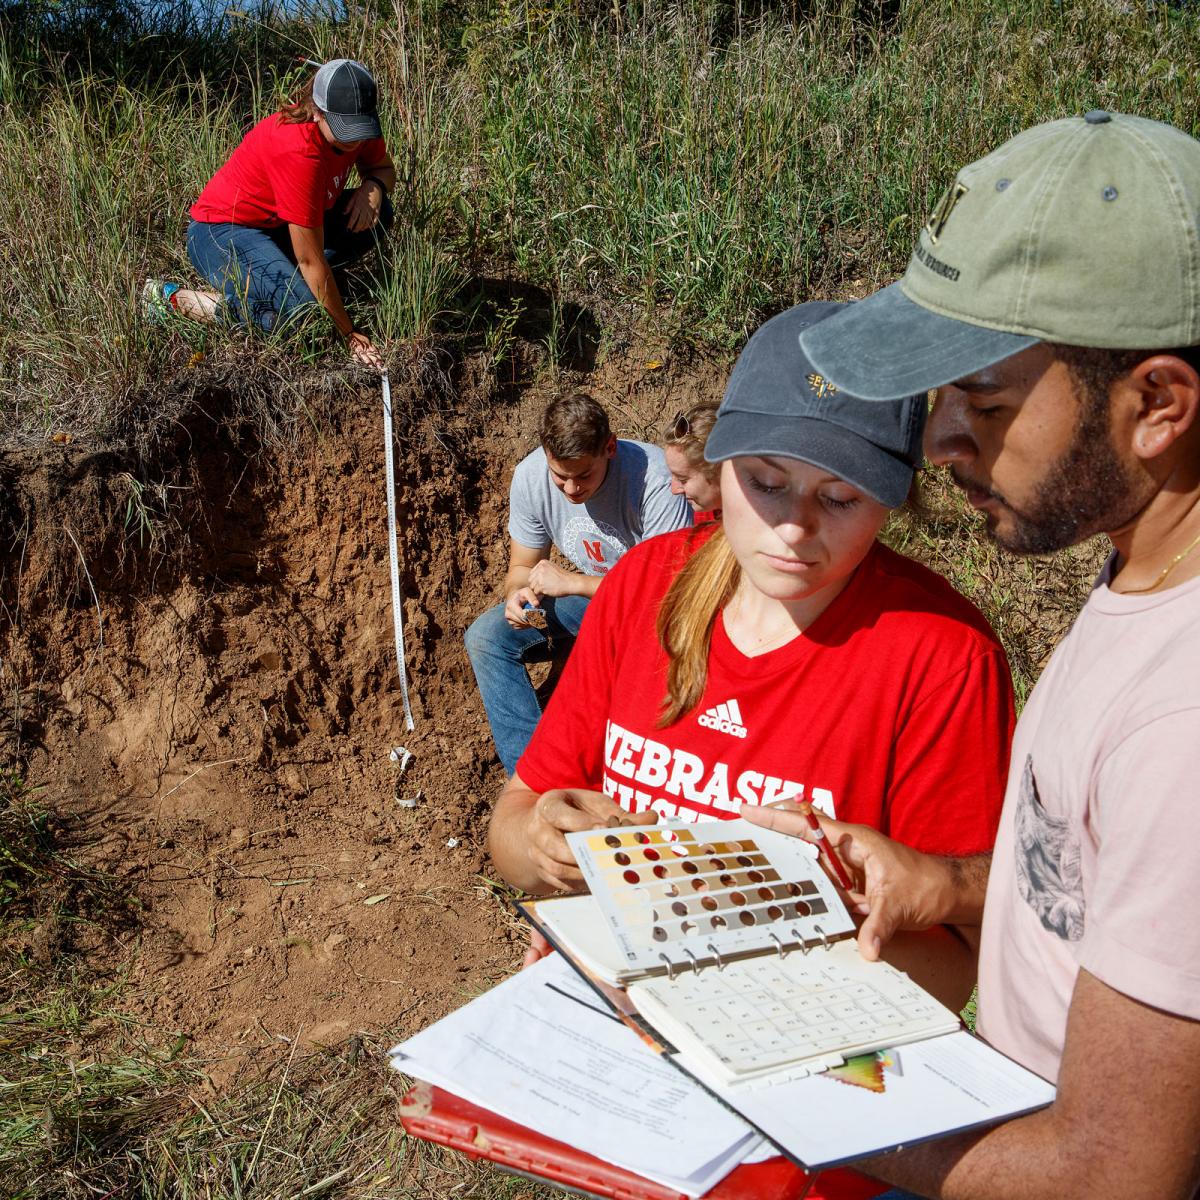 Students doing research in the field